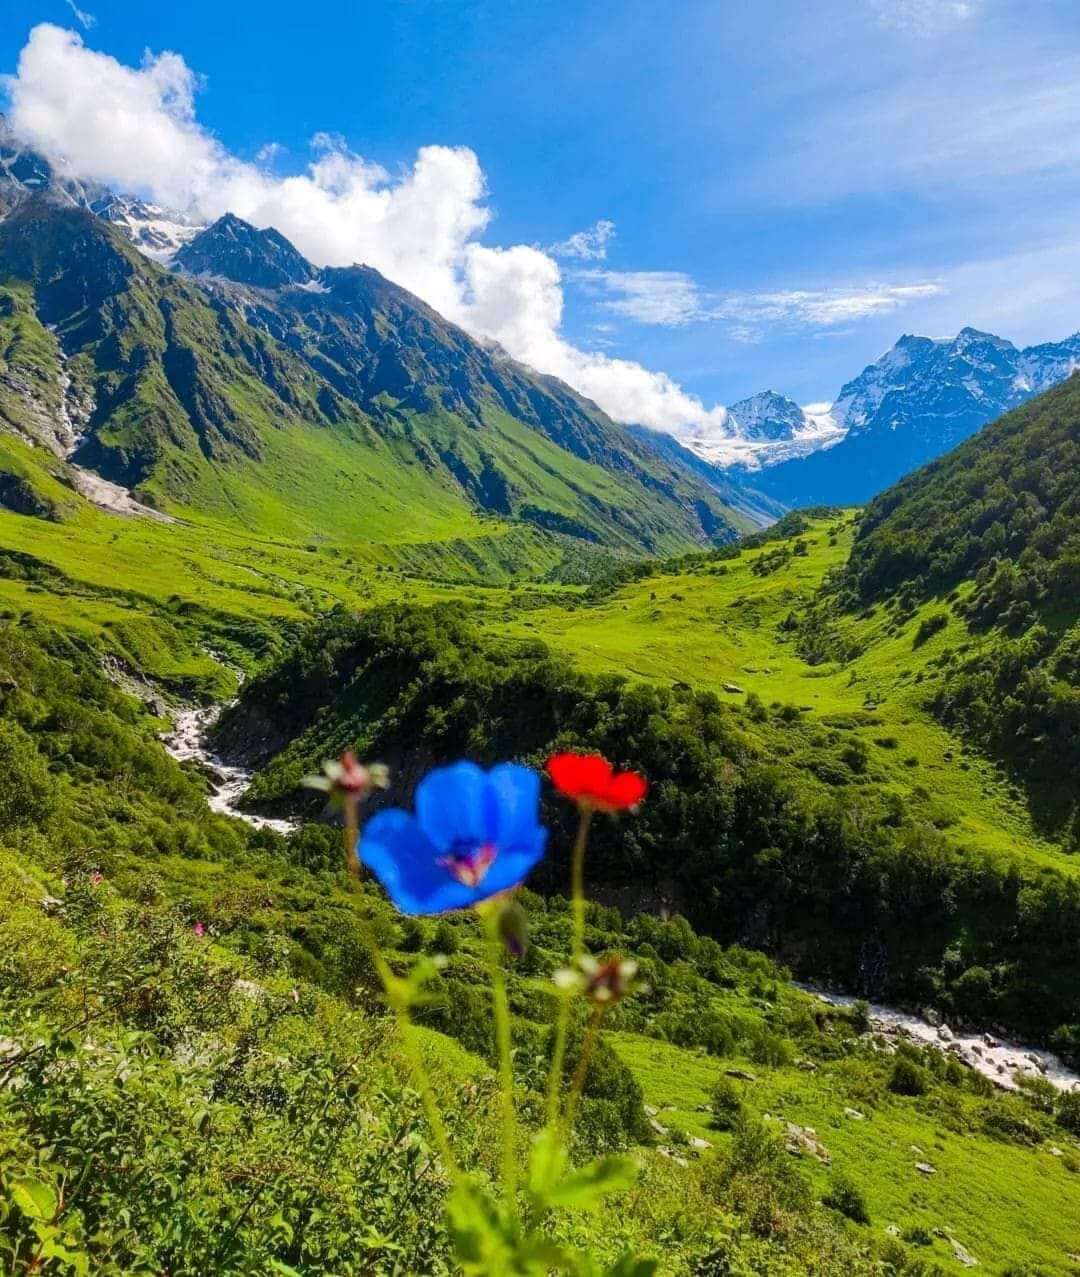 <span  class="uc_style_uc_tiles_grid_image_elementor_uc_items_attribute_title" style="color:#ffffff;">Valley of Flowers- dreamgohimalayas.in</span>